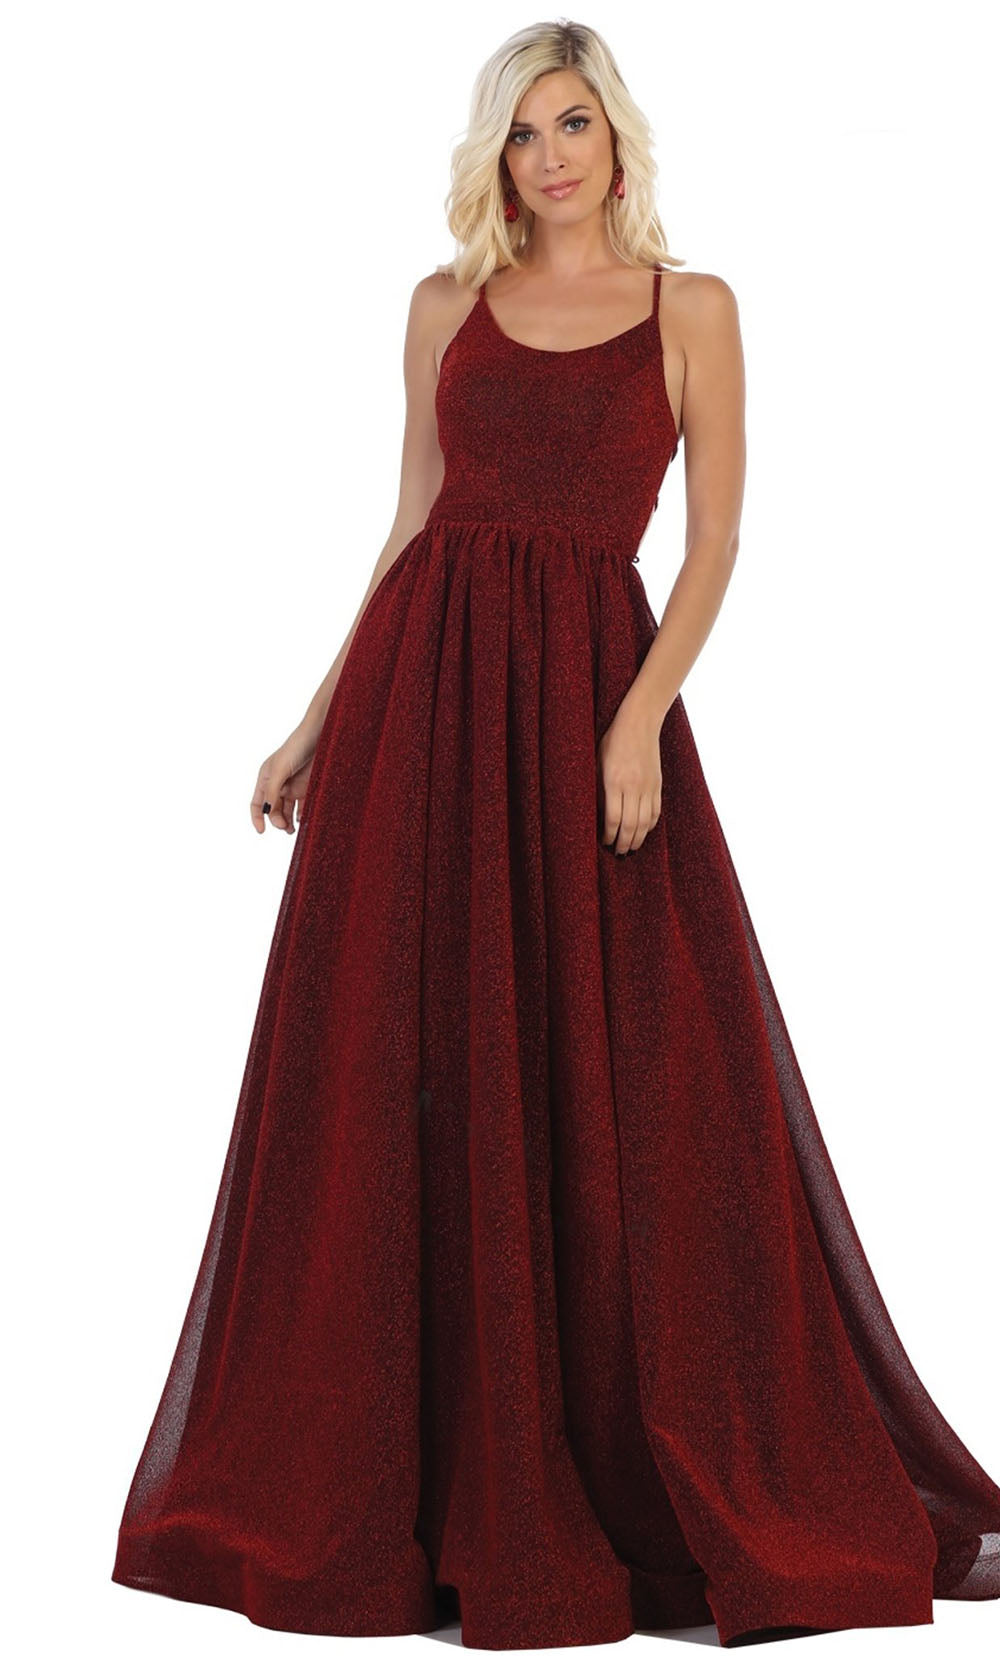 May Queen - RQ7724 Scoop Glittered A-Line Gown In Red and Black